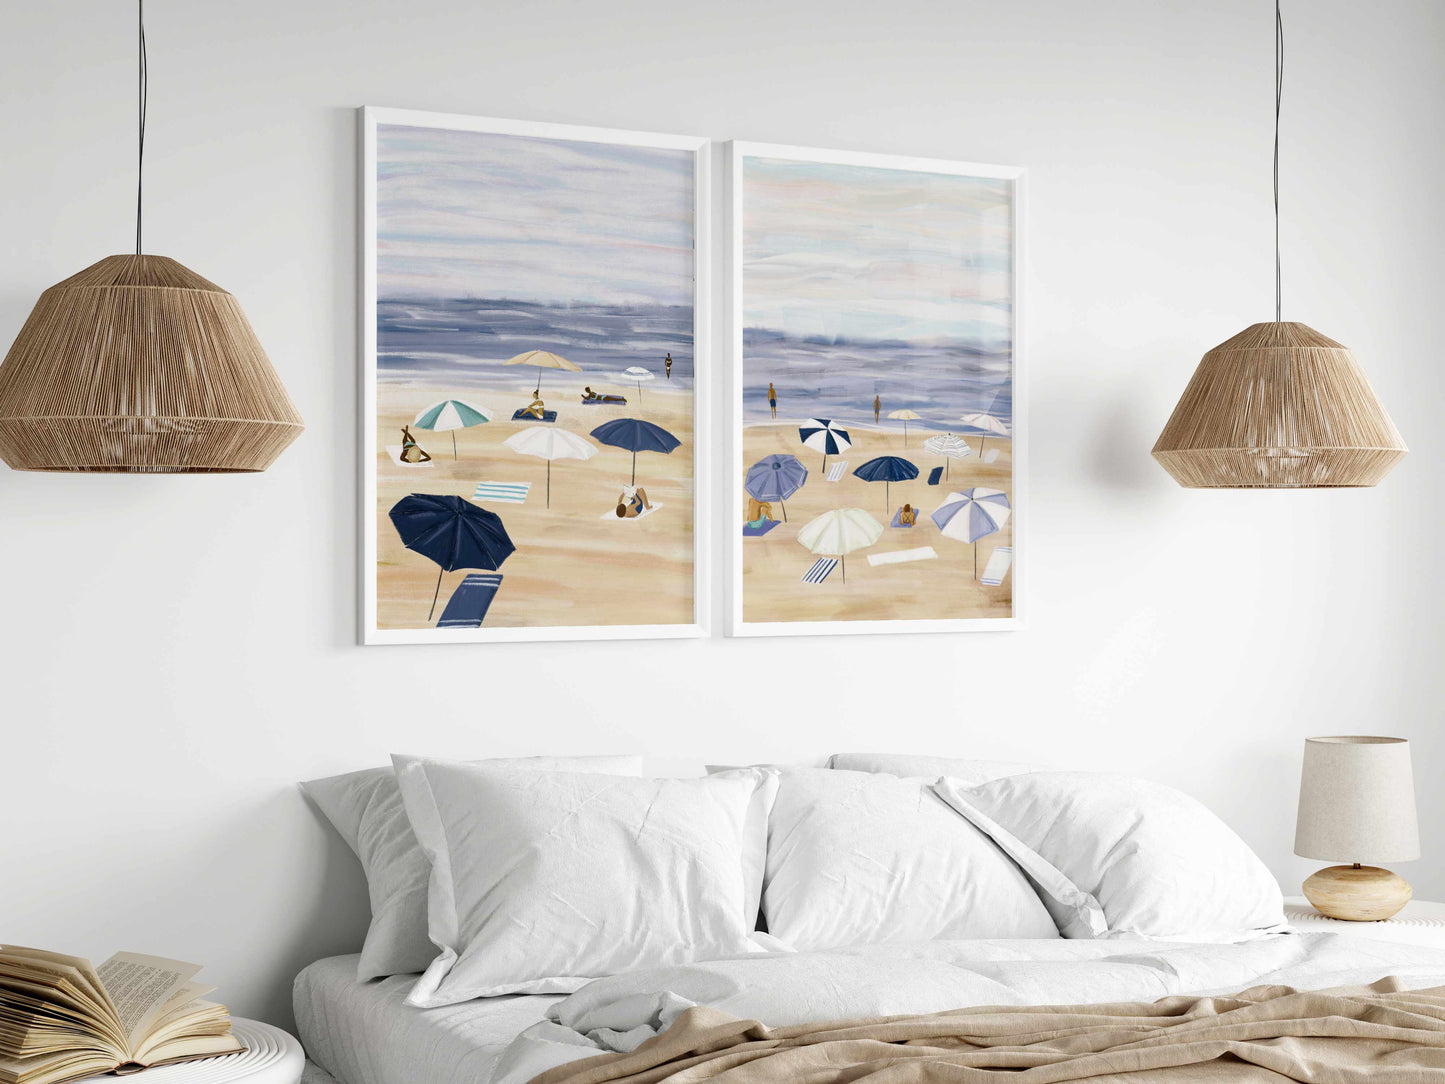 two paintings hang above a bed in a bedroom